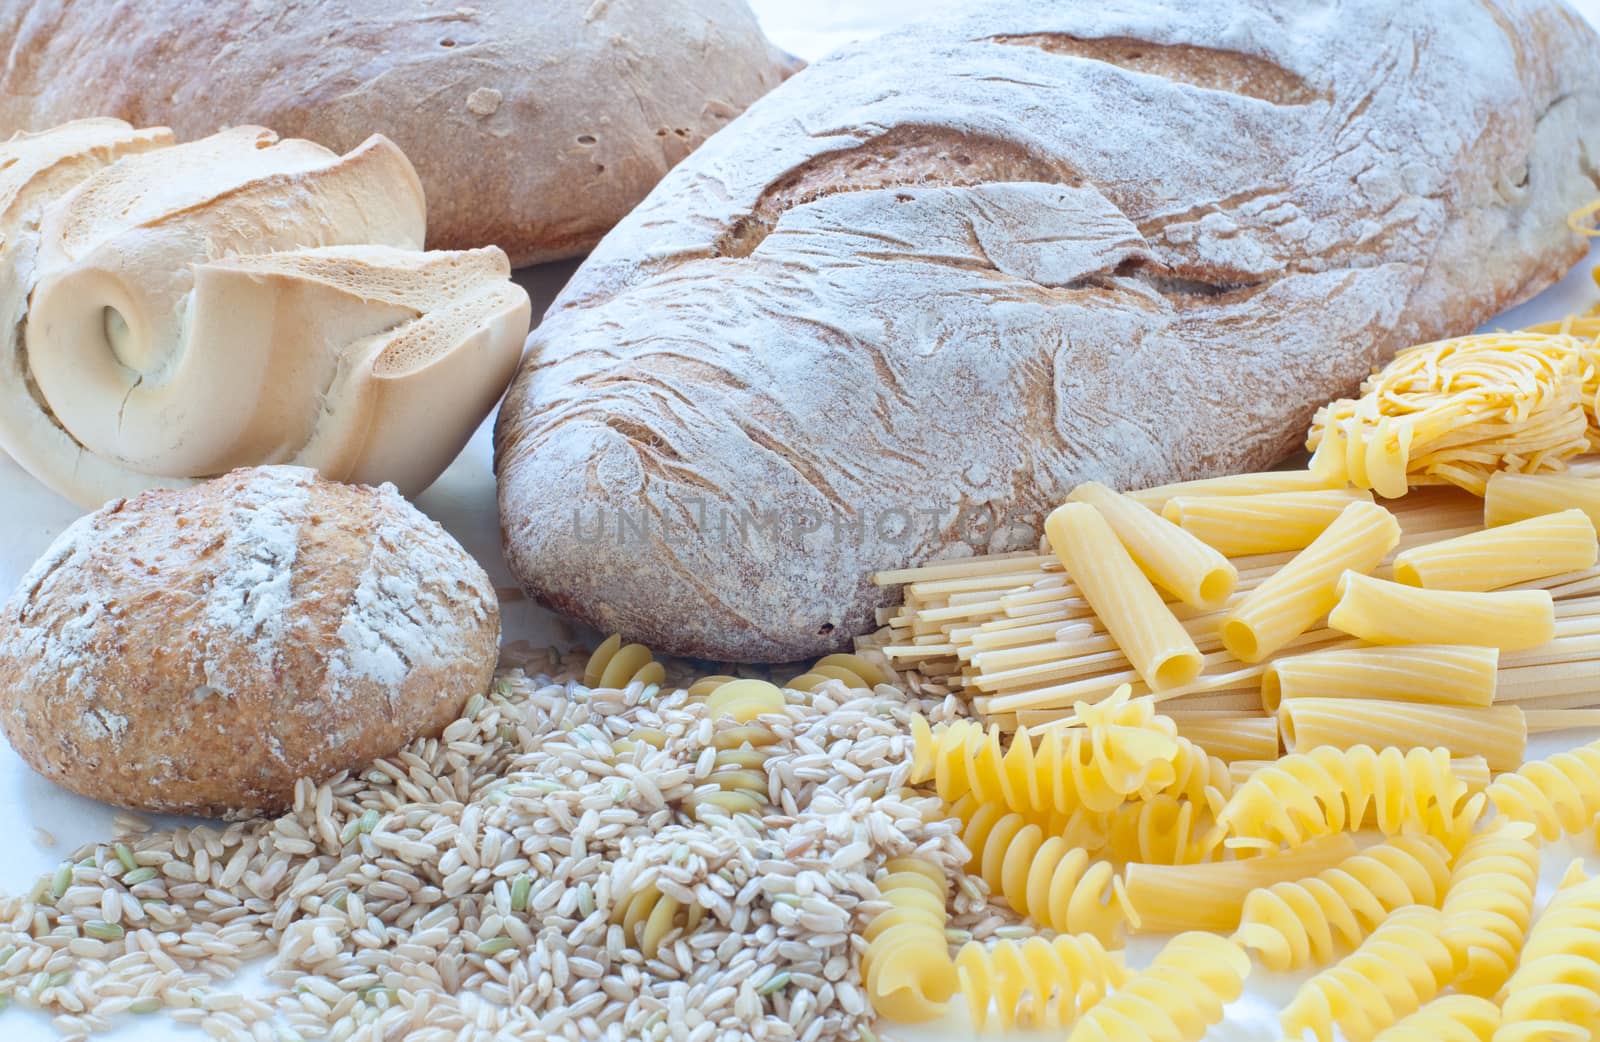 Different varieties of Italian pasta and homemade bread